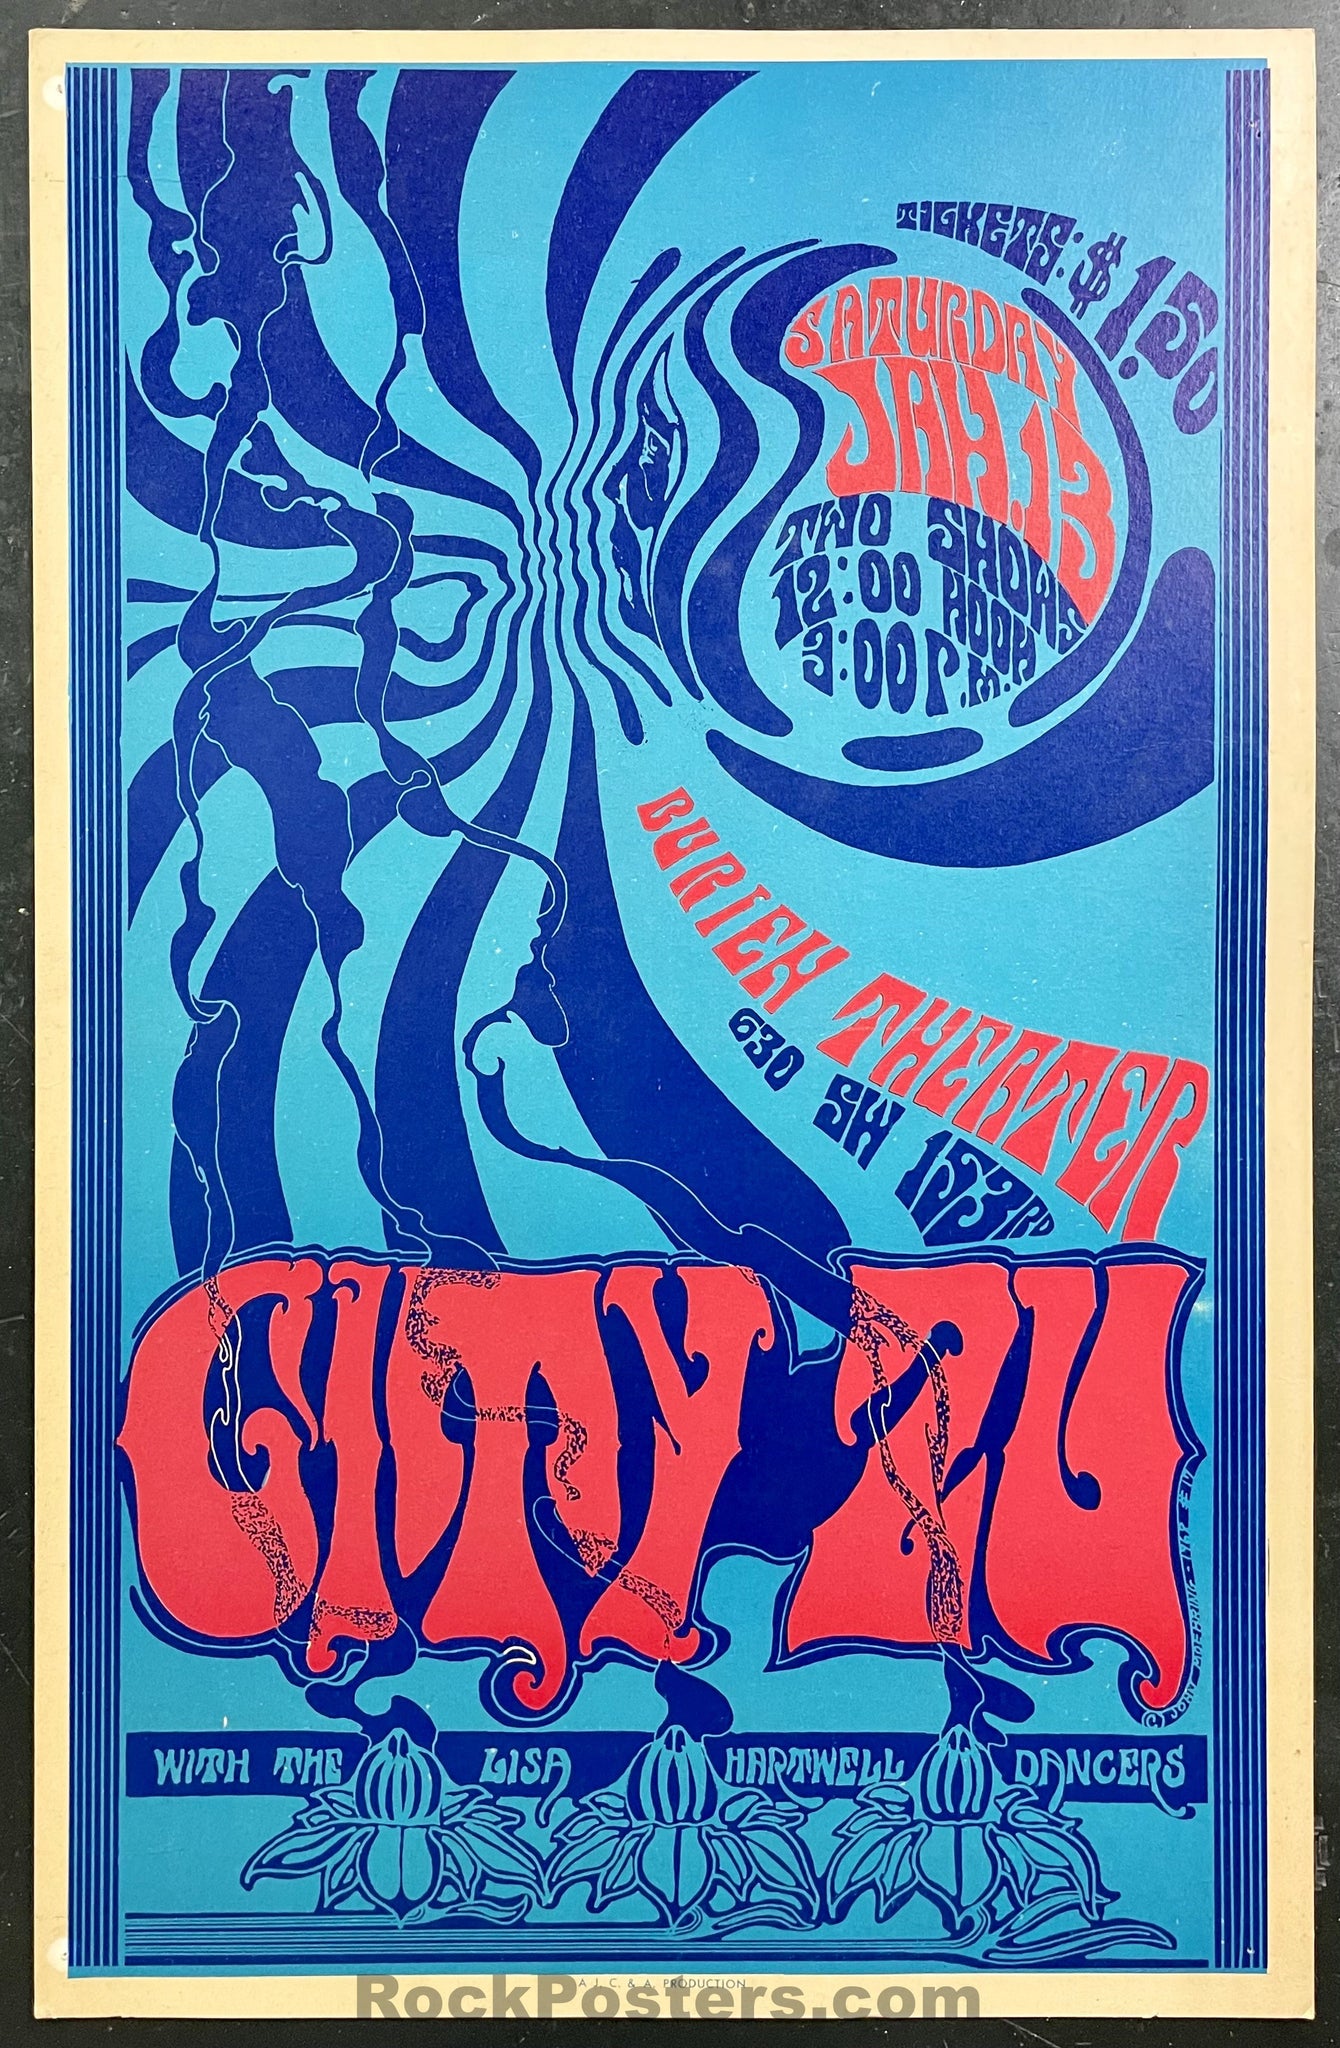 AUCTION - City Zu - John Moehring - 1968 Cardboard Poster - Seattle -  Excellent